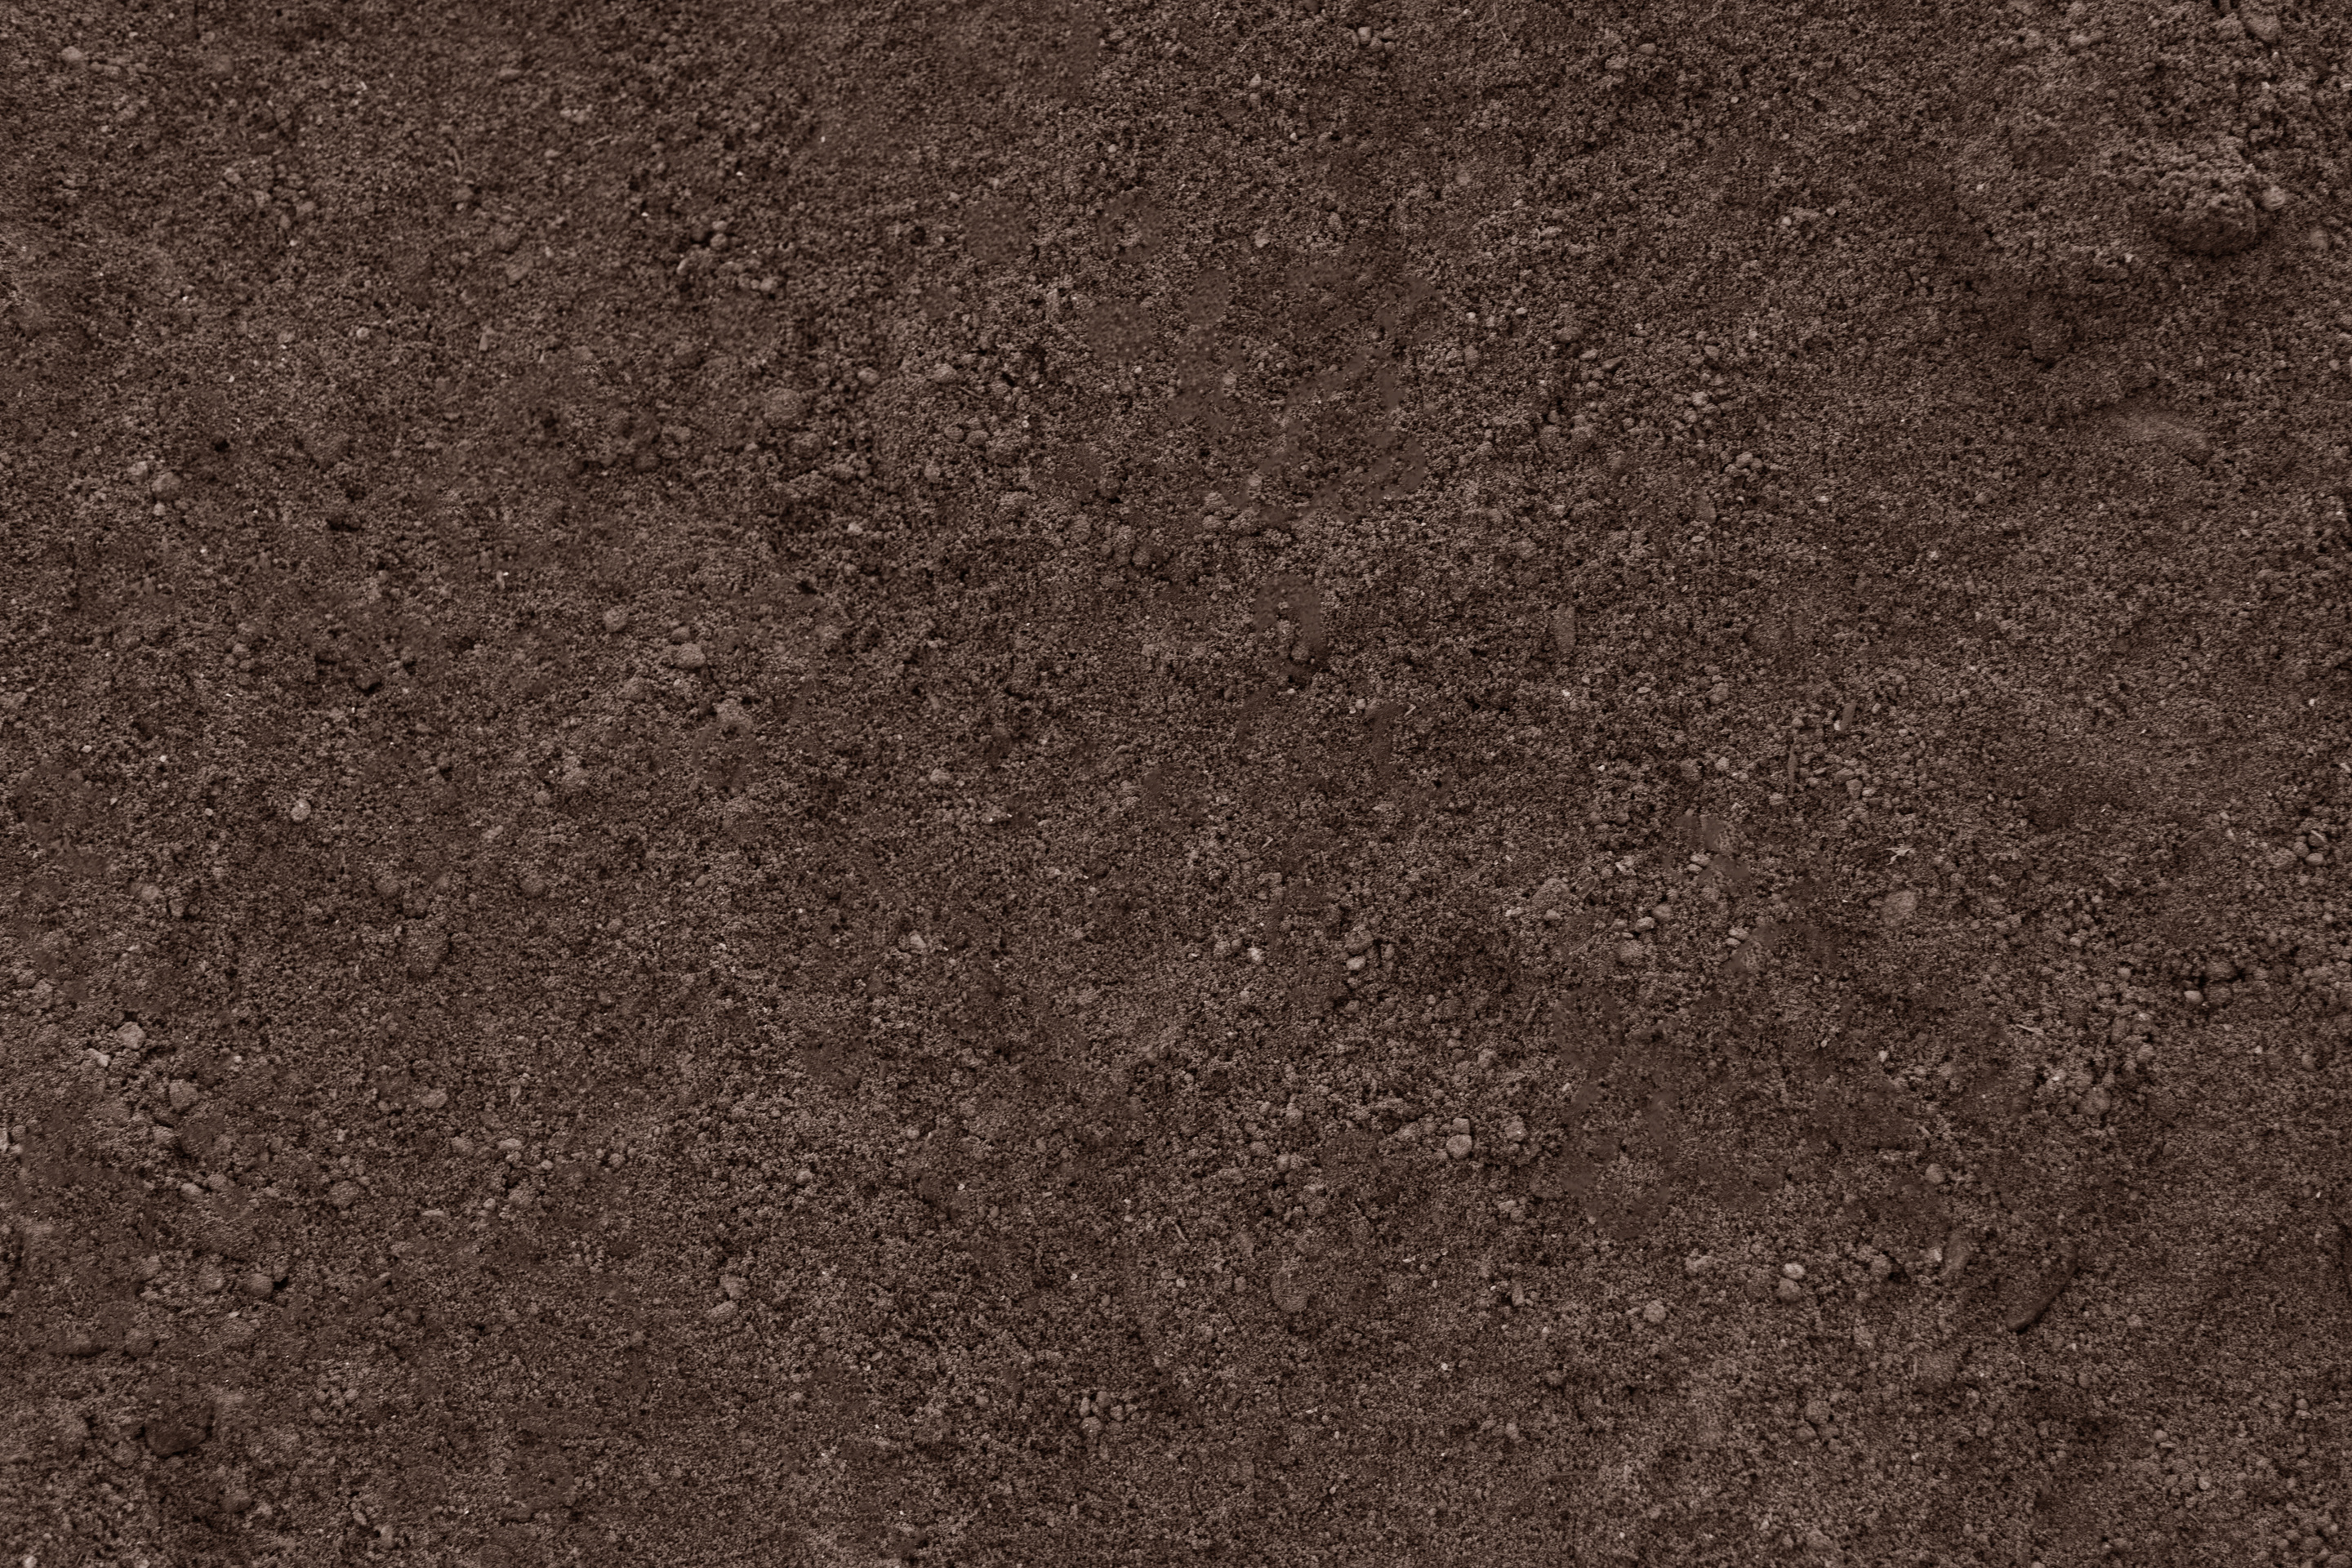 Background of Brown Soil 